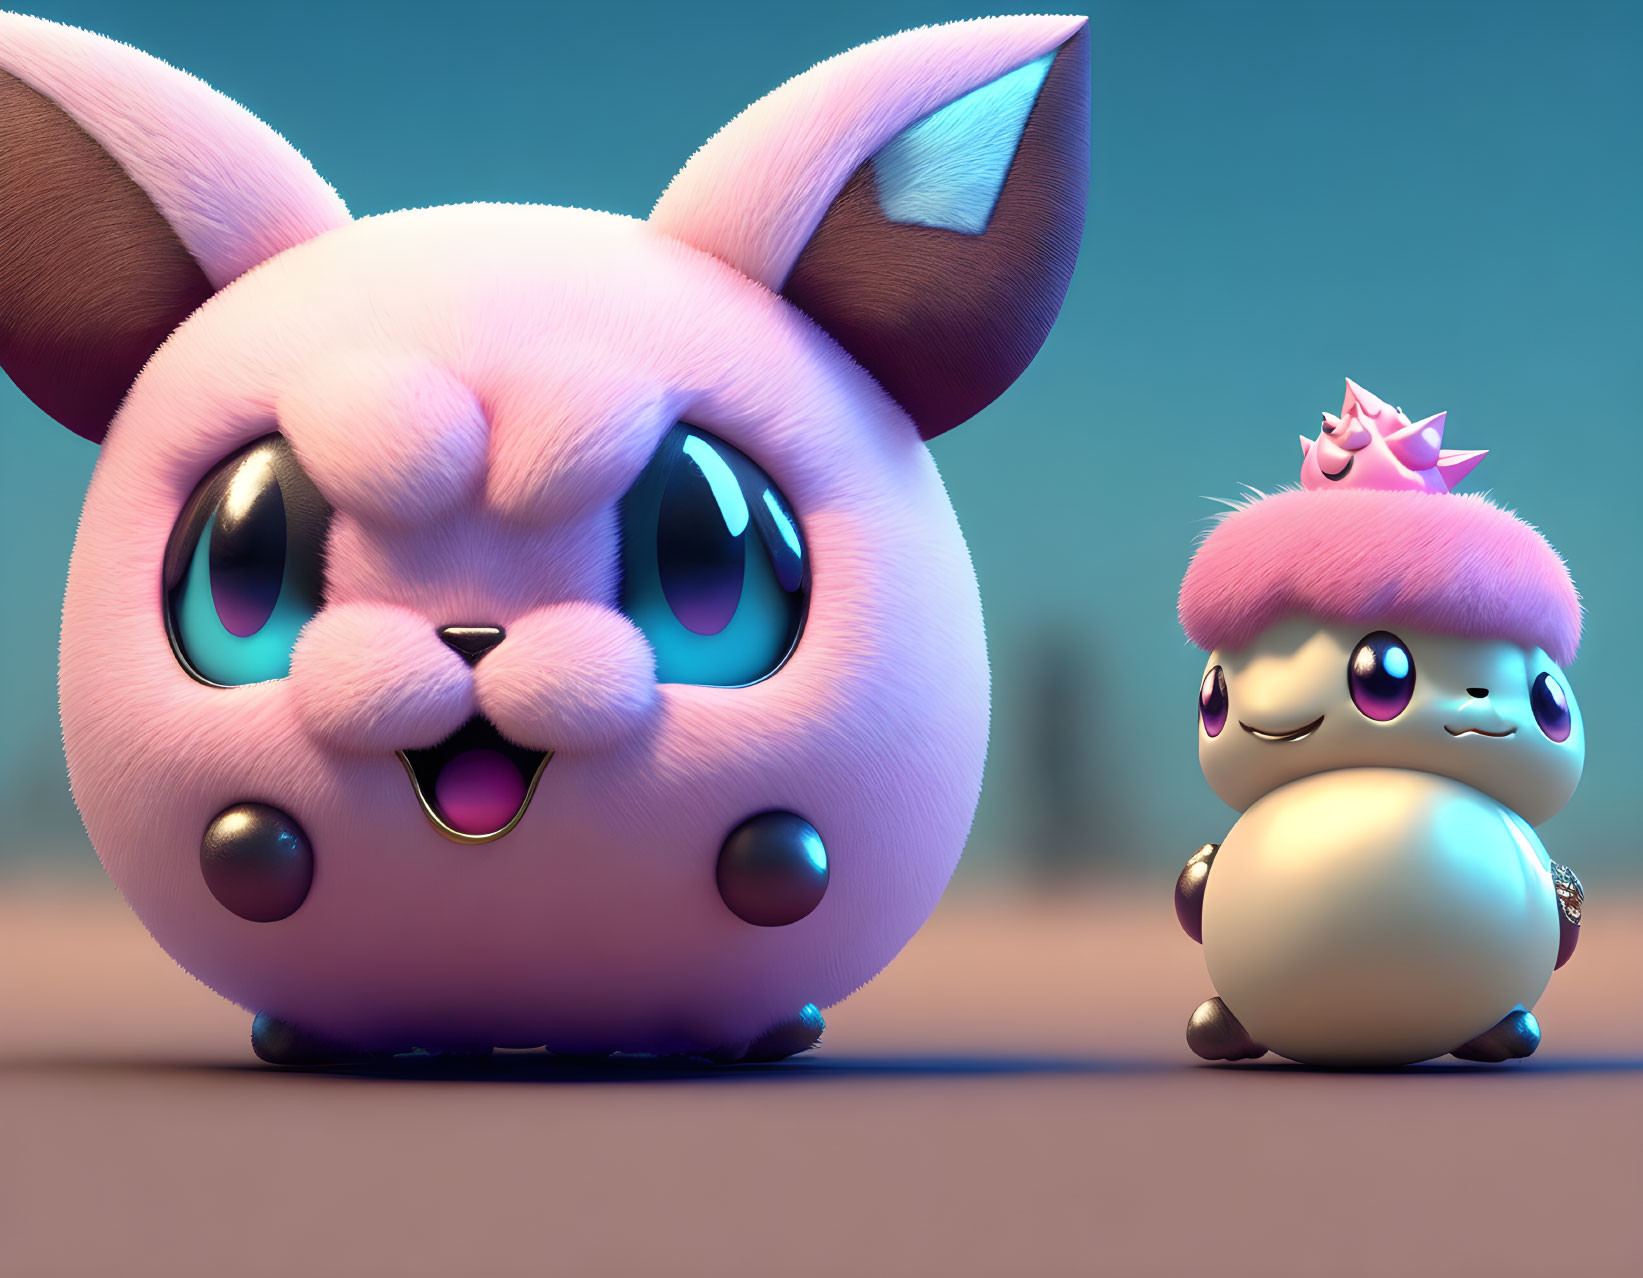 Stylized 3D animated creatures: Large pink and small crowned.